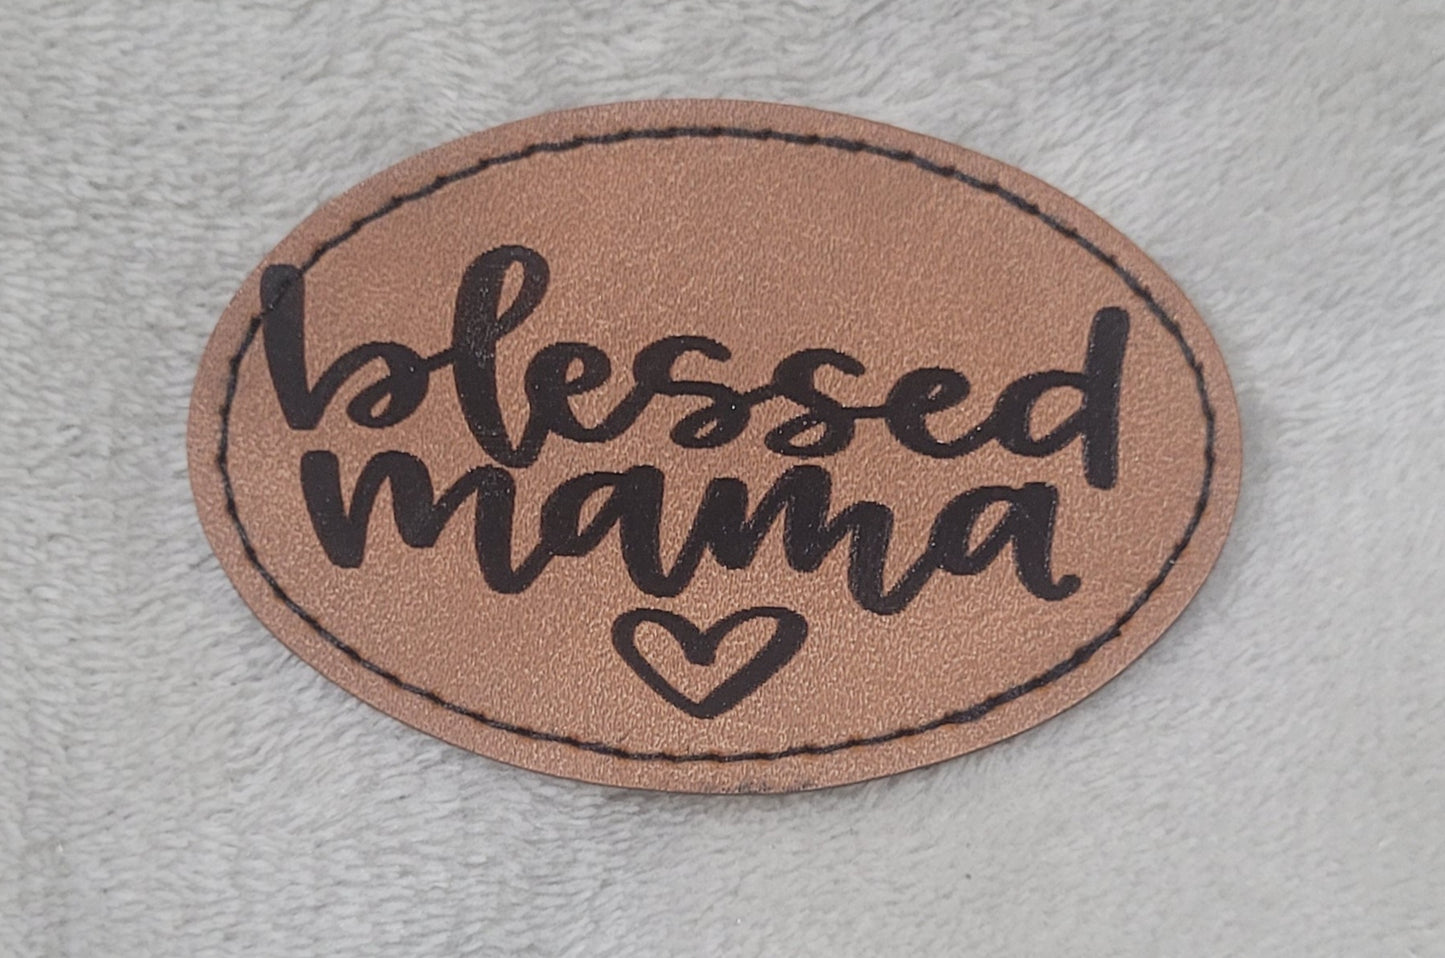 Blessed Mama Patch